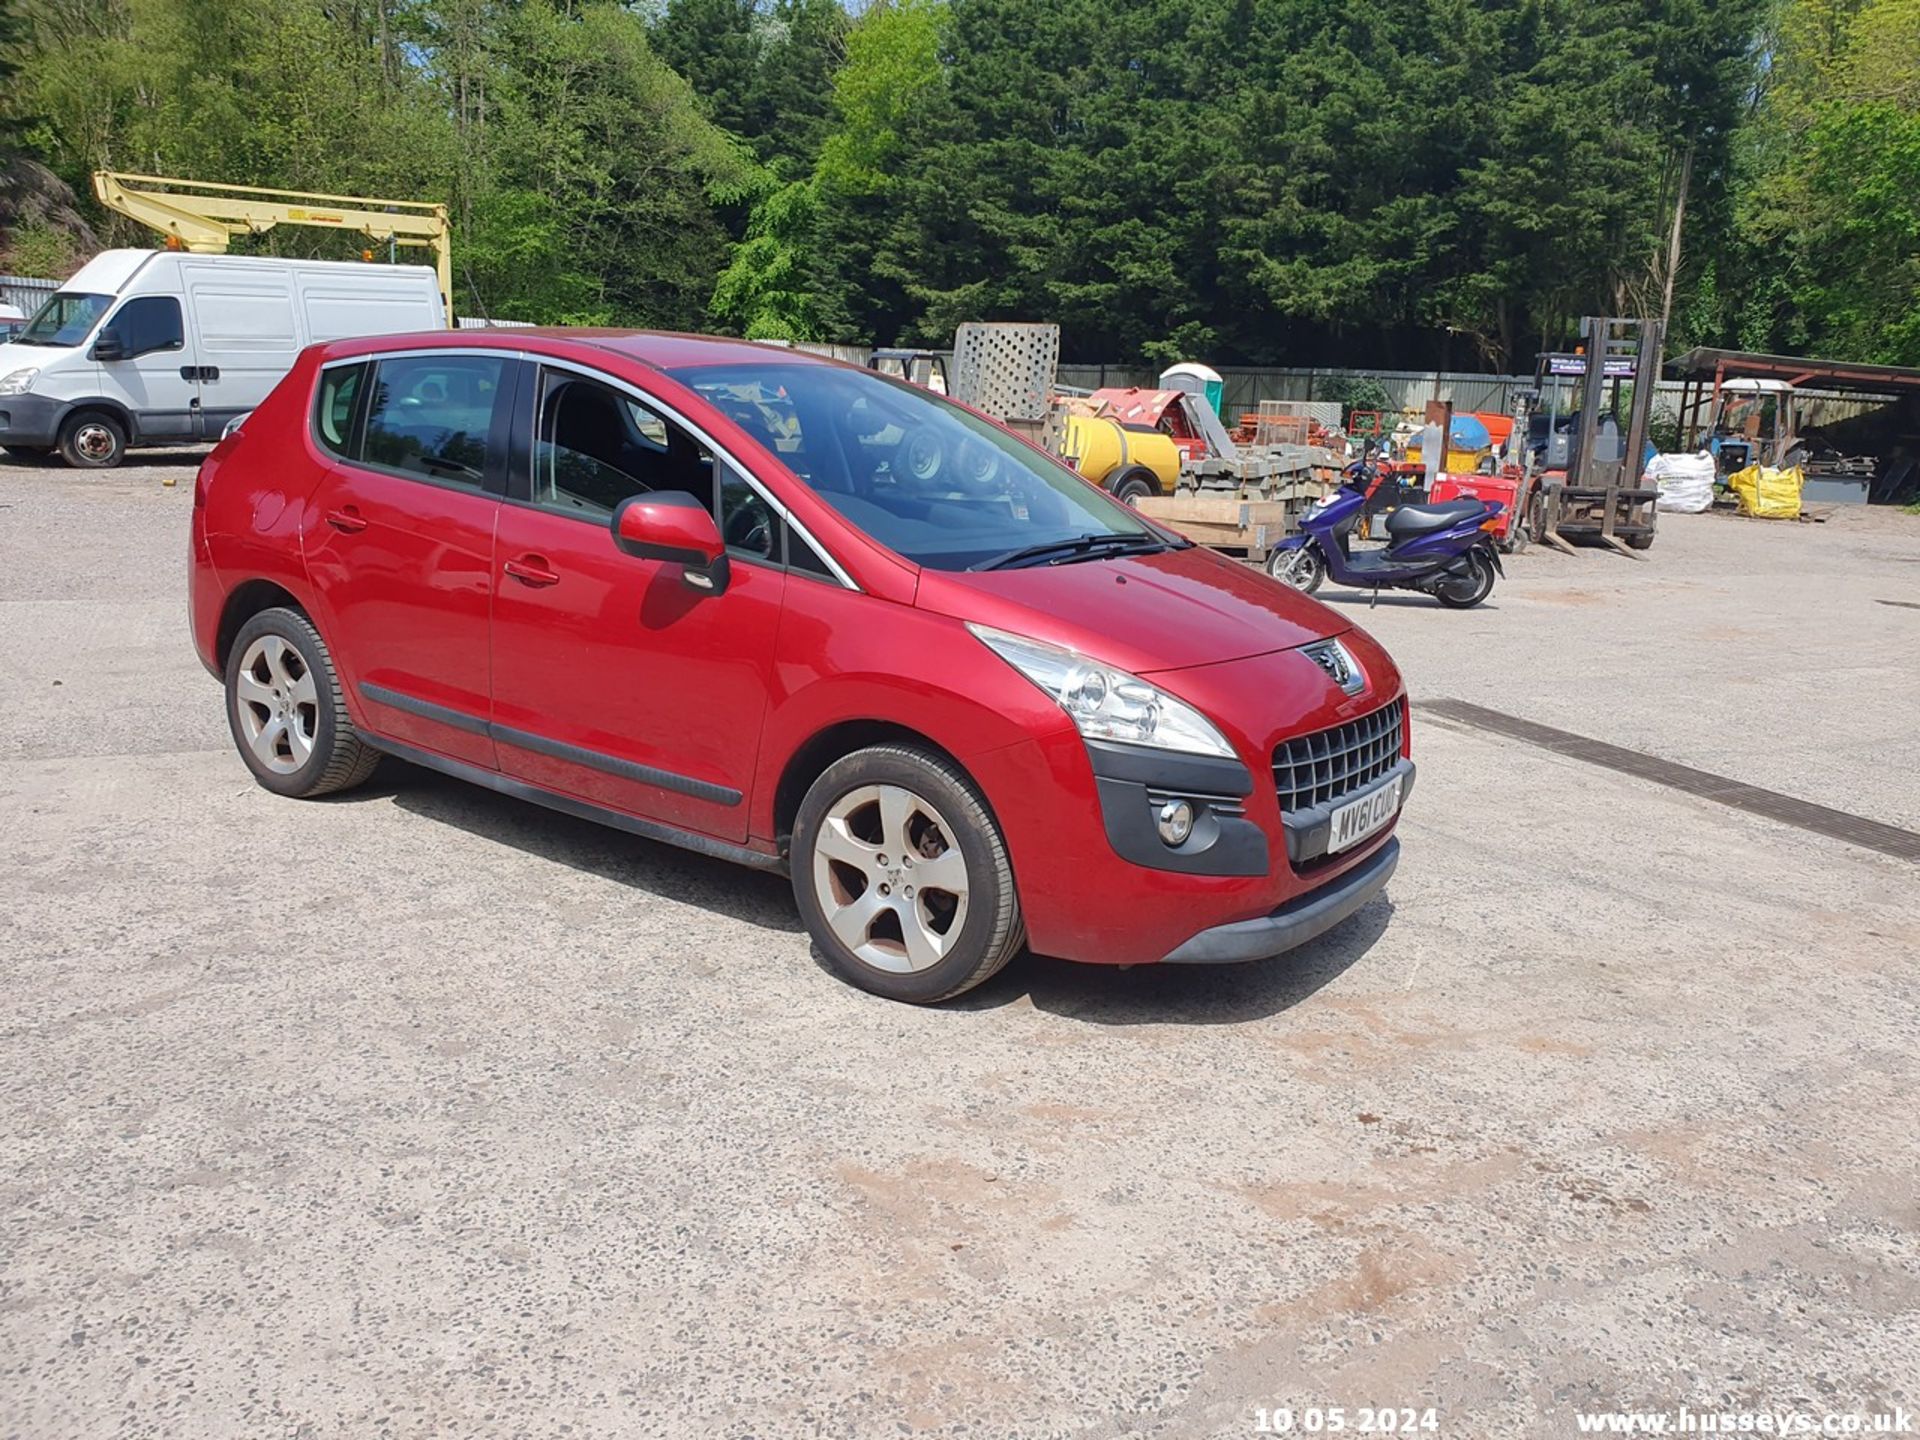 11/61 PEUGEOT 3008 SPORT E-HDI S-A - 1560cc 5dr Hatchback (Red, 89k) - Image 6 of 49